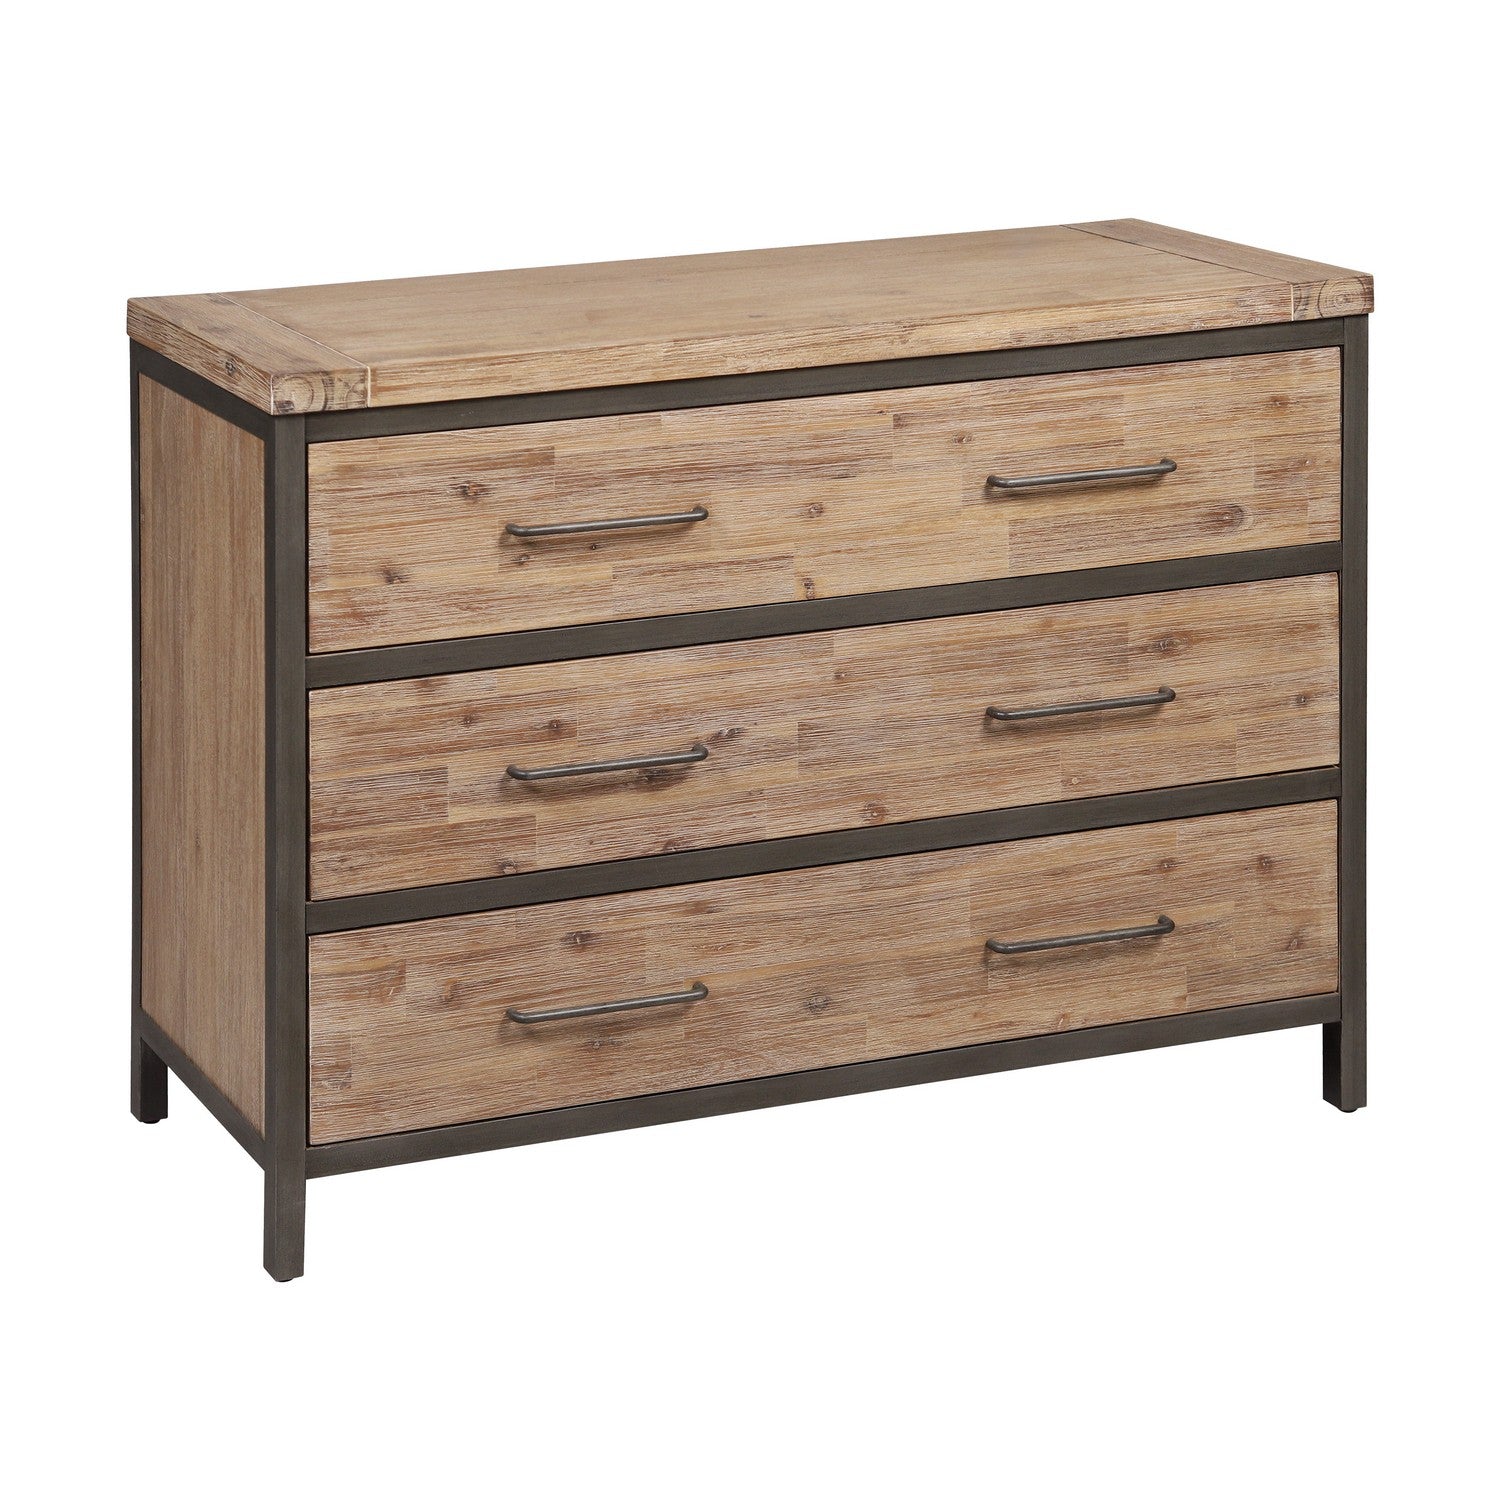 ELK Home - S0115-7799 - Chest - Cork County - Natural